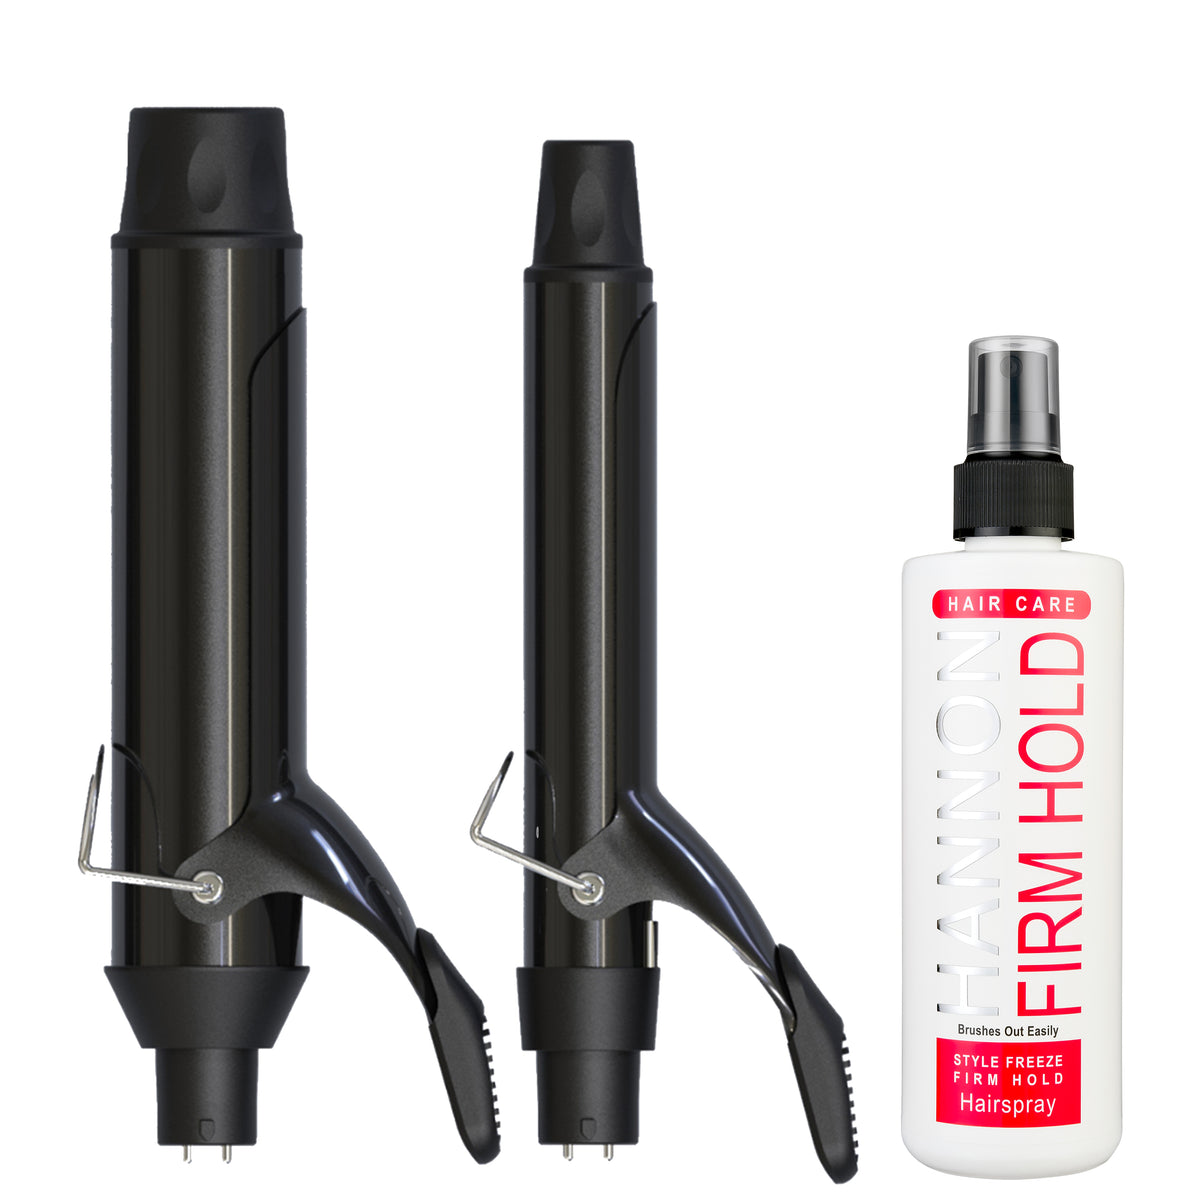 Veaudry myCurl Interchangeable - CLAMP DUO & Style Freeze Firm Hold Hairspray